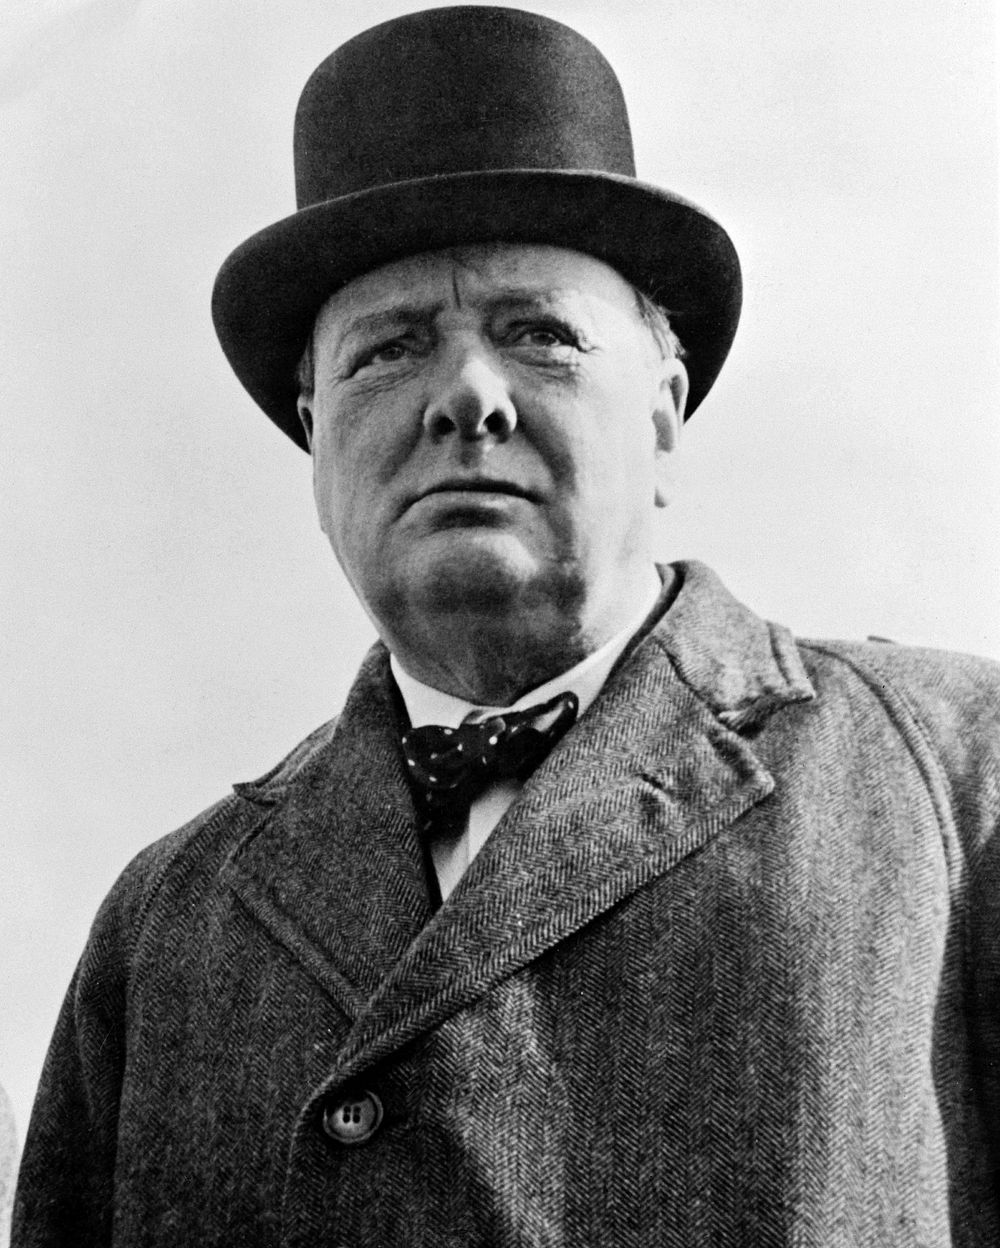 Winton Churchill, former prime minister of the UK - unknown date & location